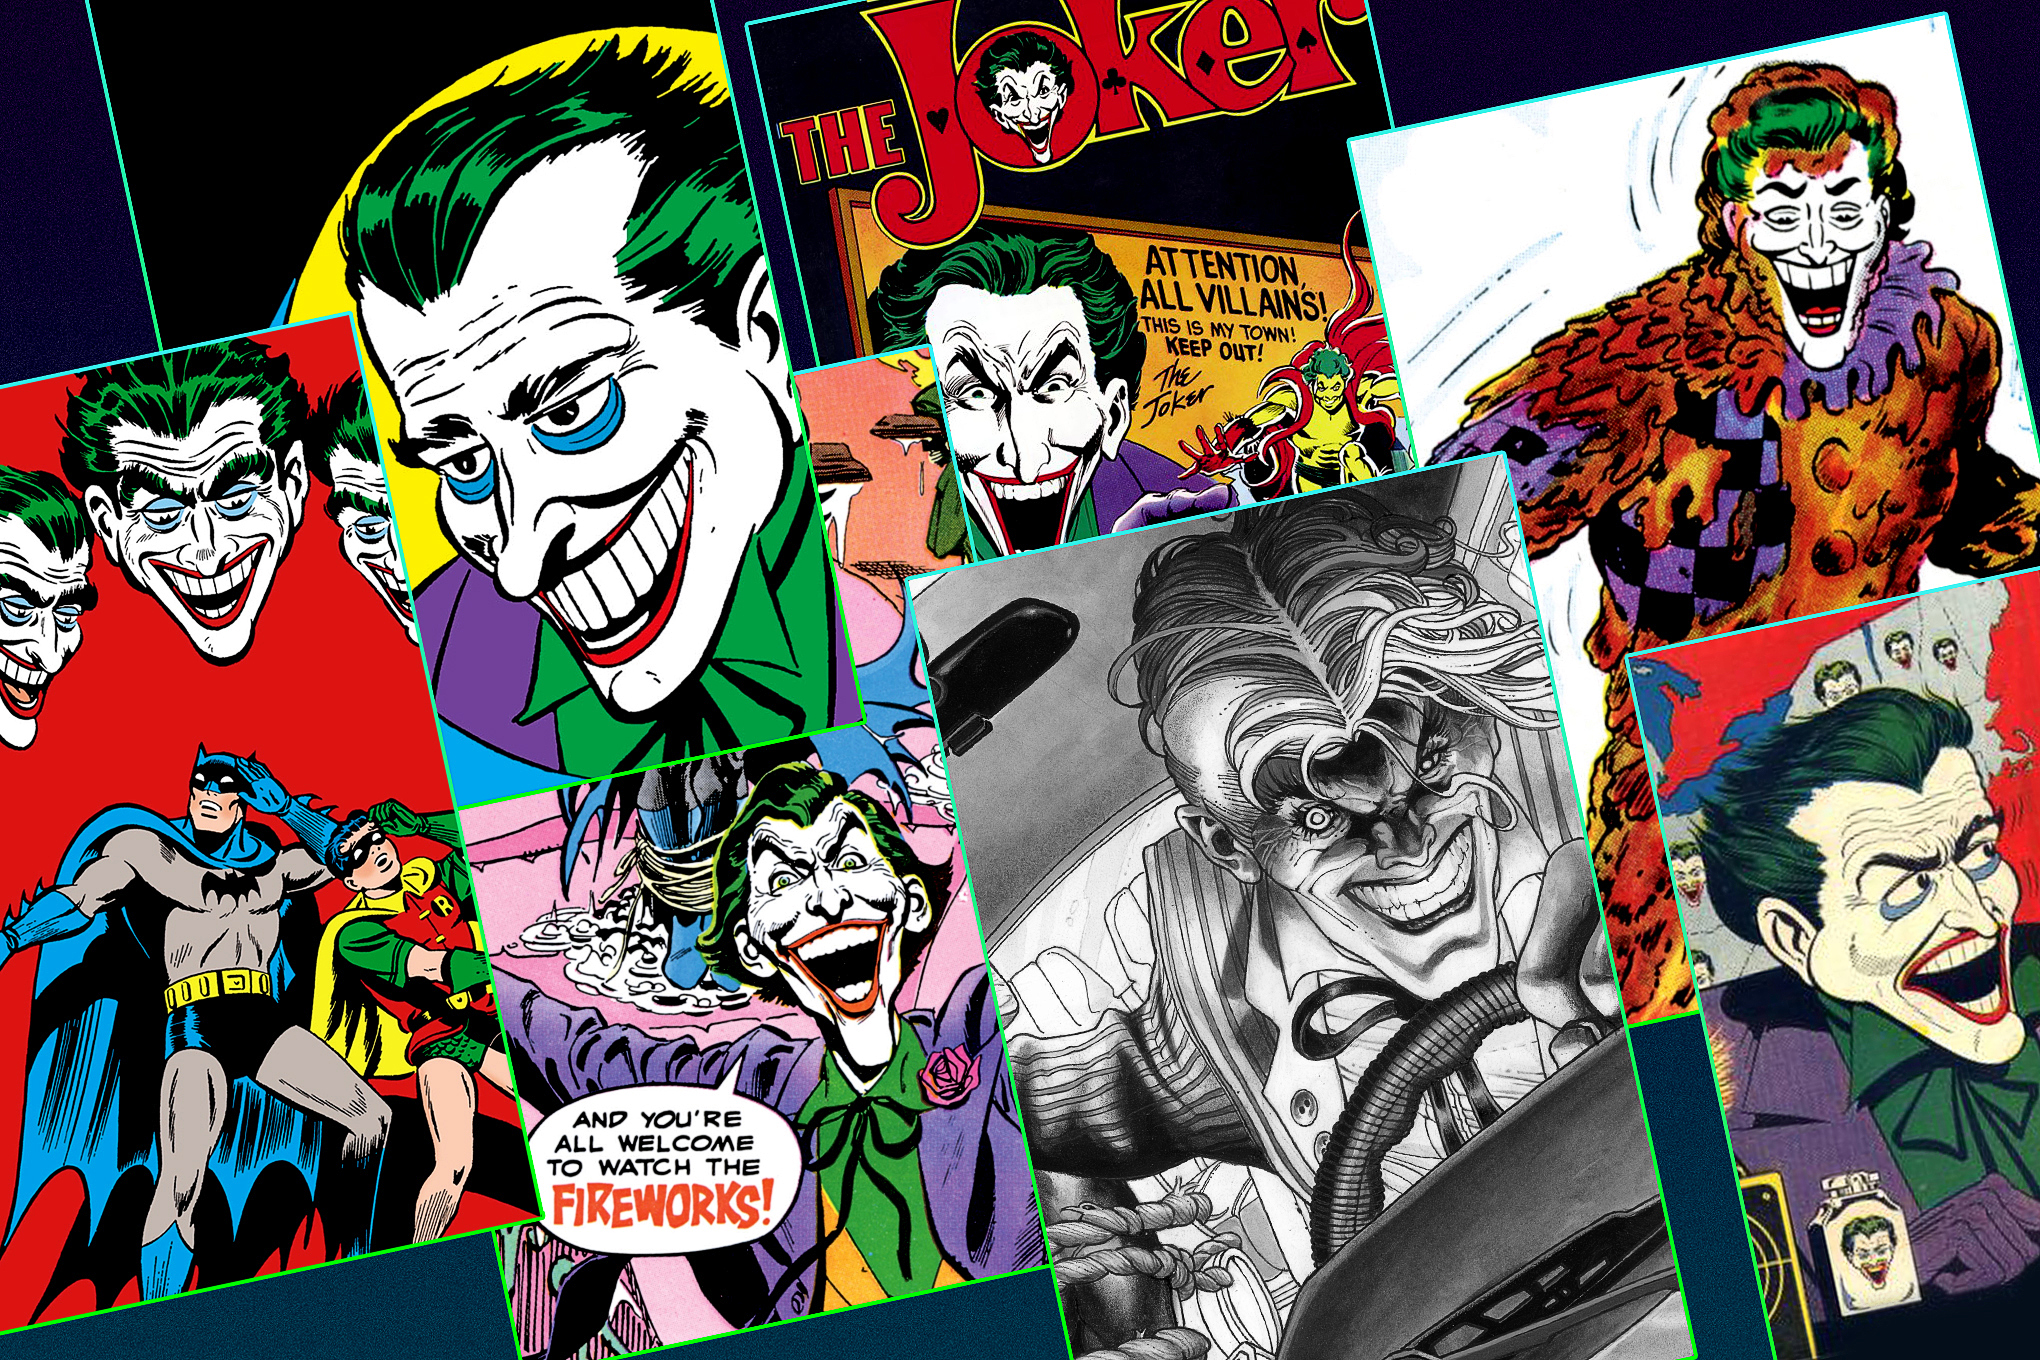 the covers of seven different comics featuring “The Joker”